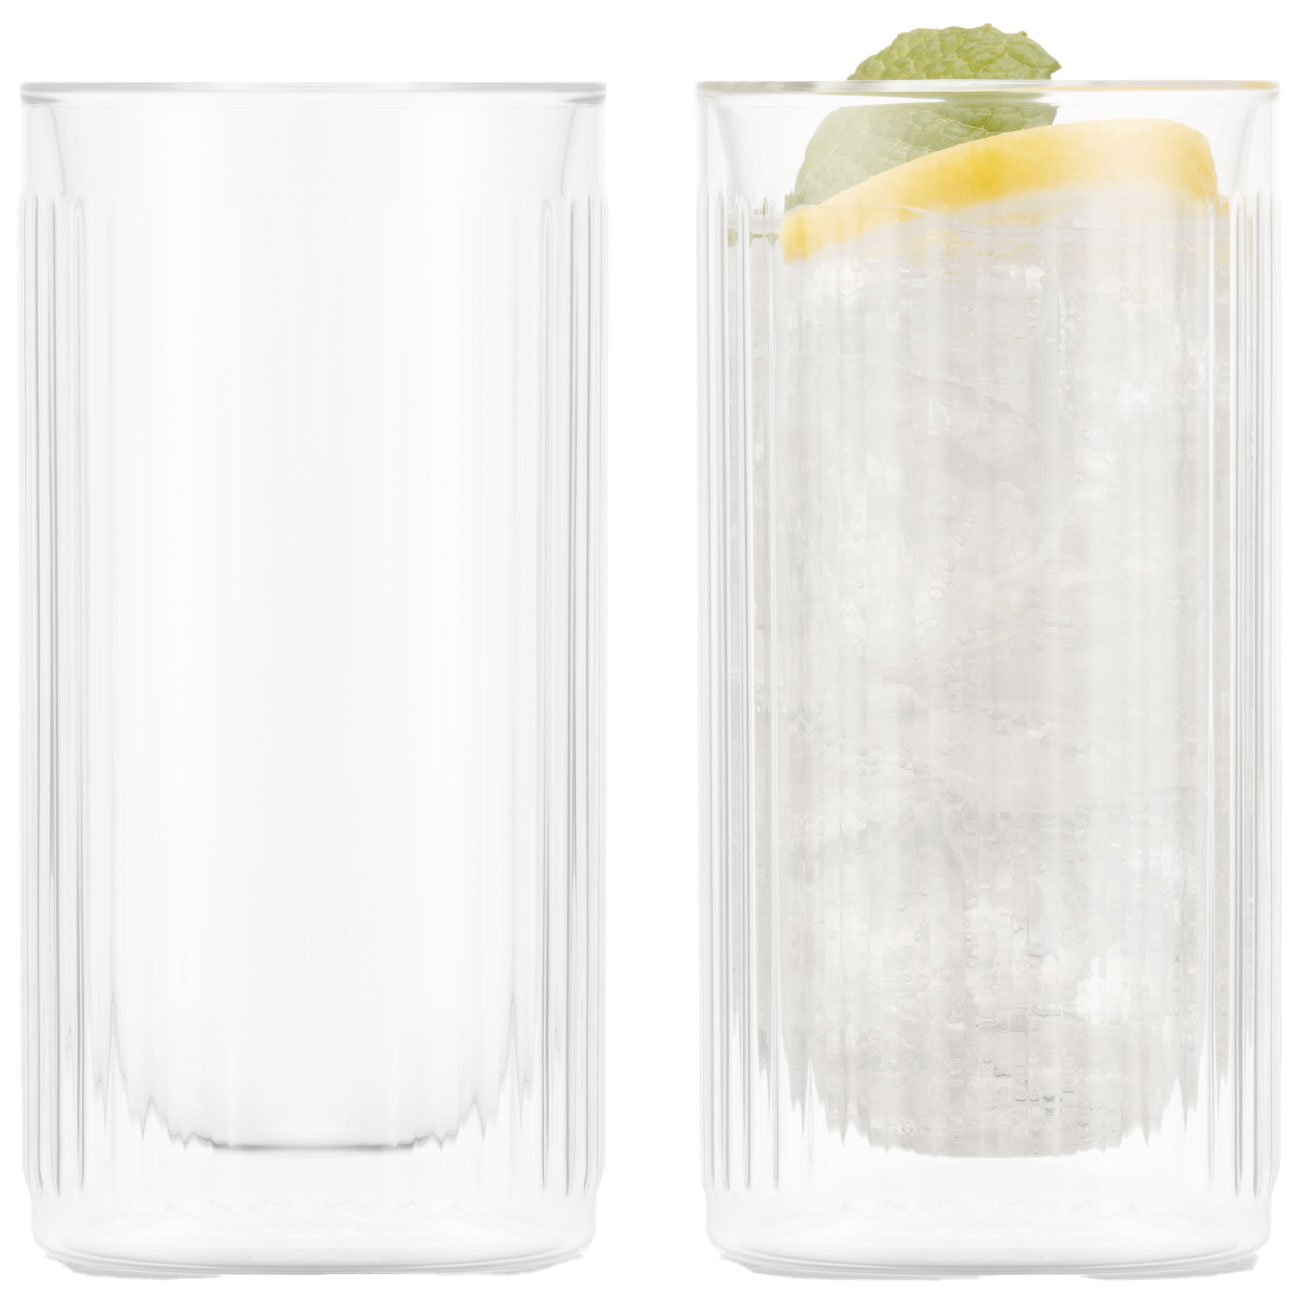 https://royaldesign.com/image/2/bodum-douro-gin-tonic-double-walled-glasses-2-pack-30-cl-0?w=800&quality=80